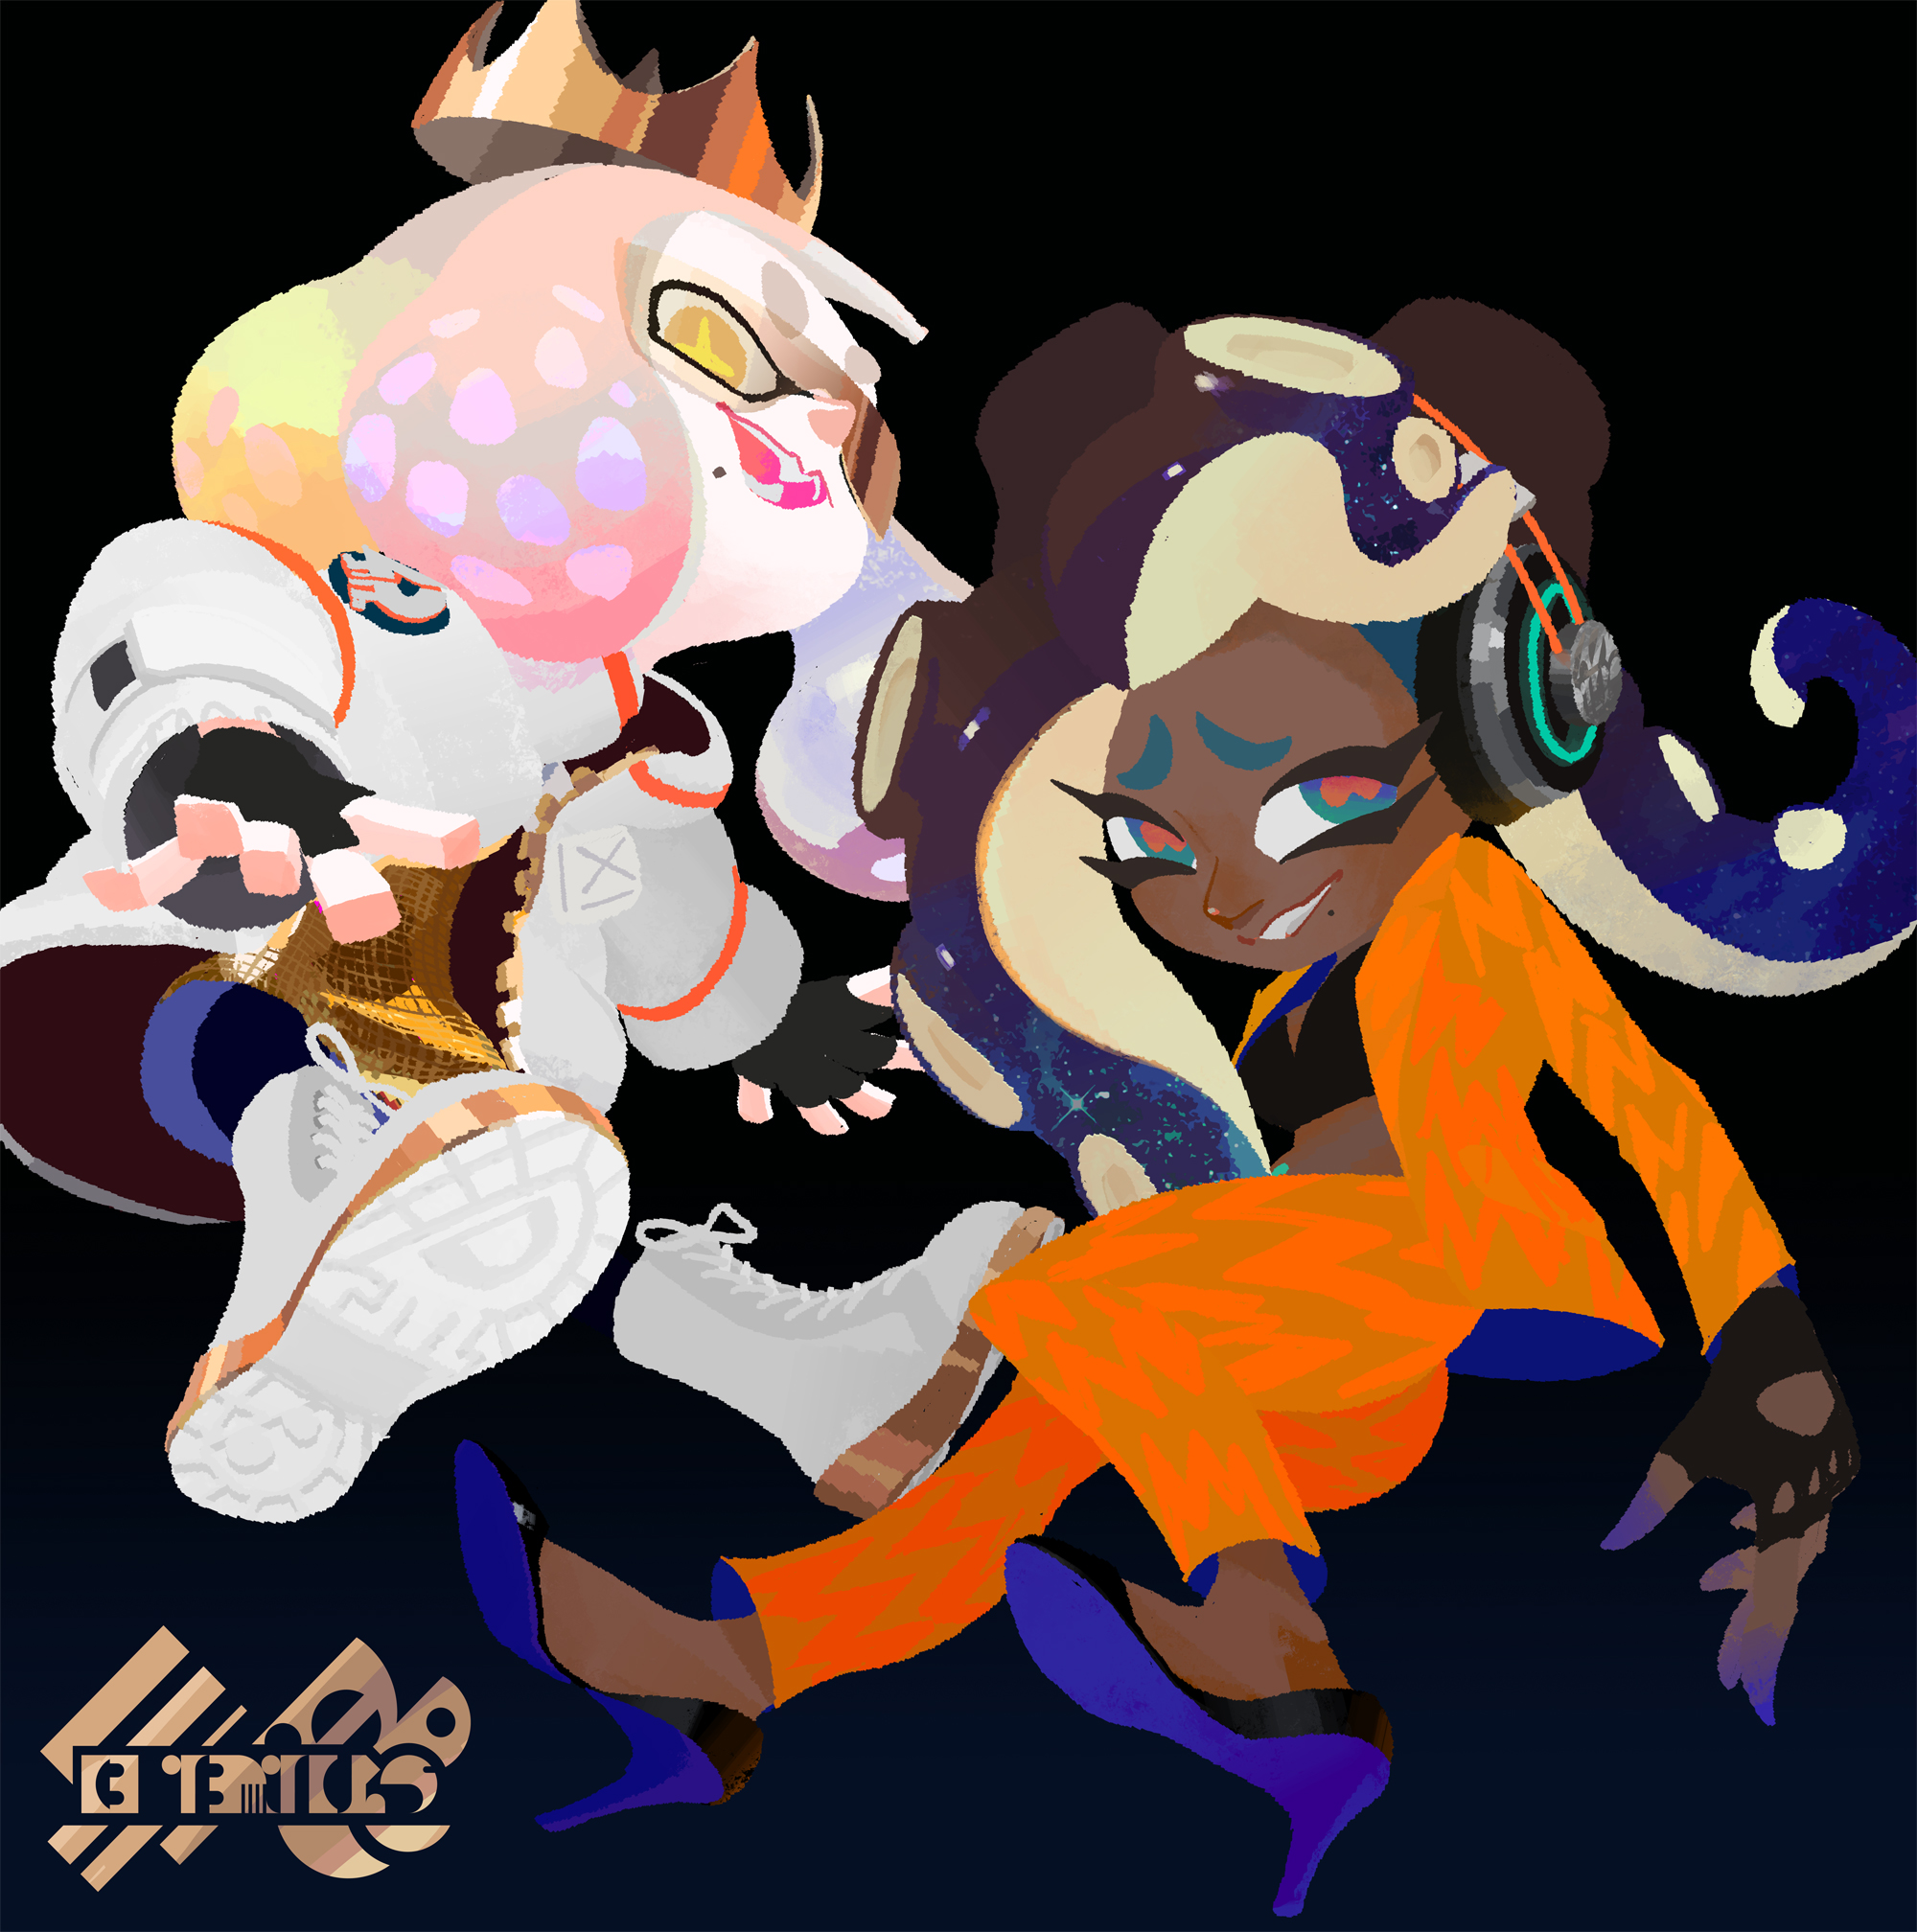 https://static.wikia.nocookie.net/splatoon/images/c/cf/Off_the_Hook_%28S3%29.jpg/revision/latest?cb=20220624141234